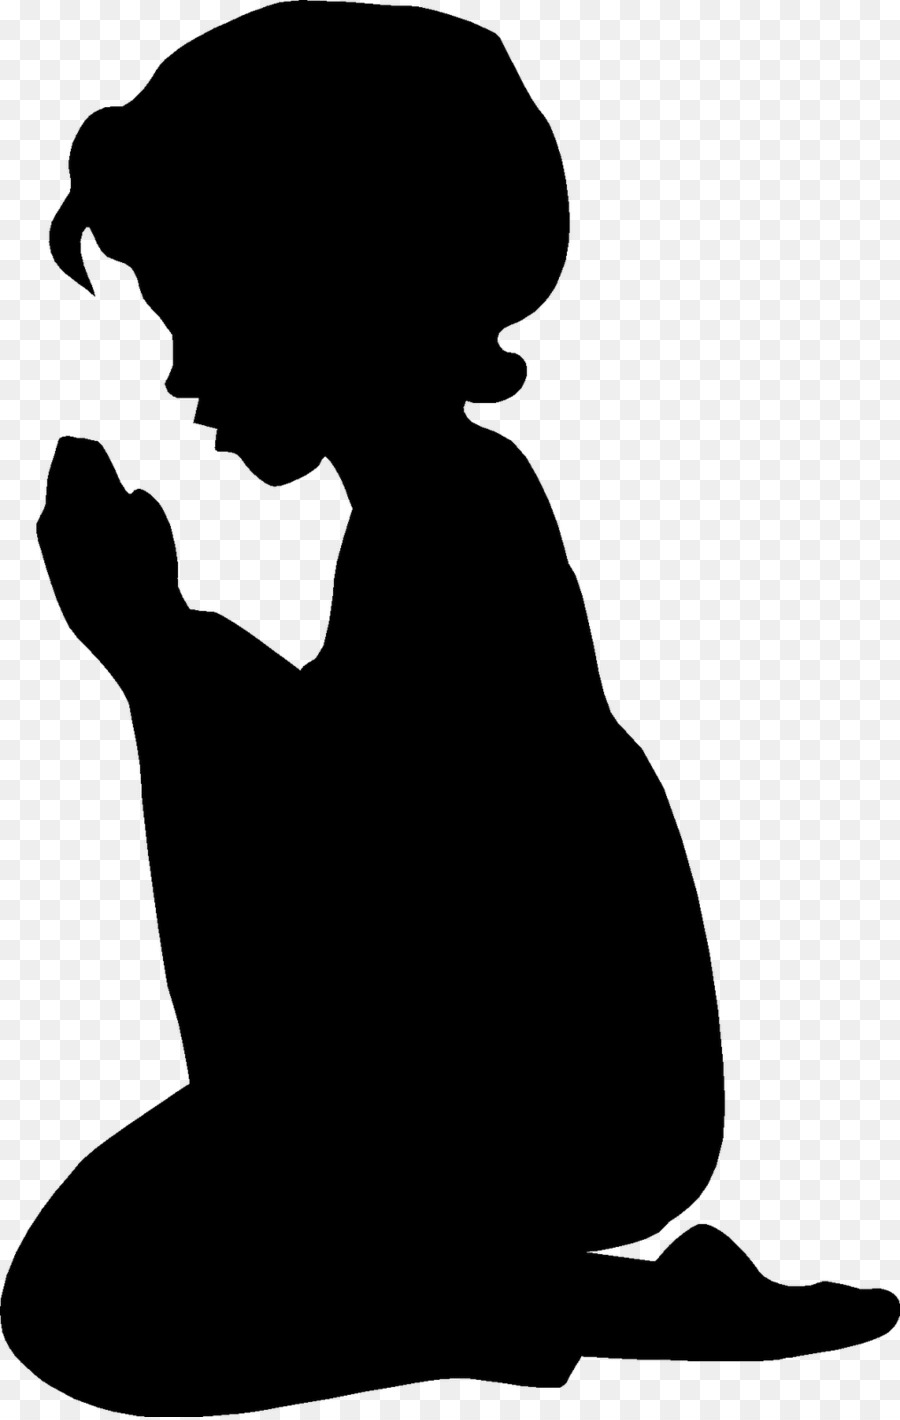 Clip Arts Related To : Silhouette Kneeling Drawing Clip art - Silhouette pn...